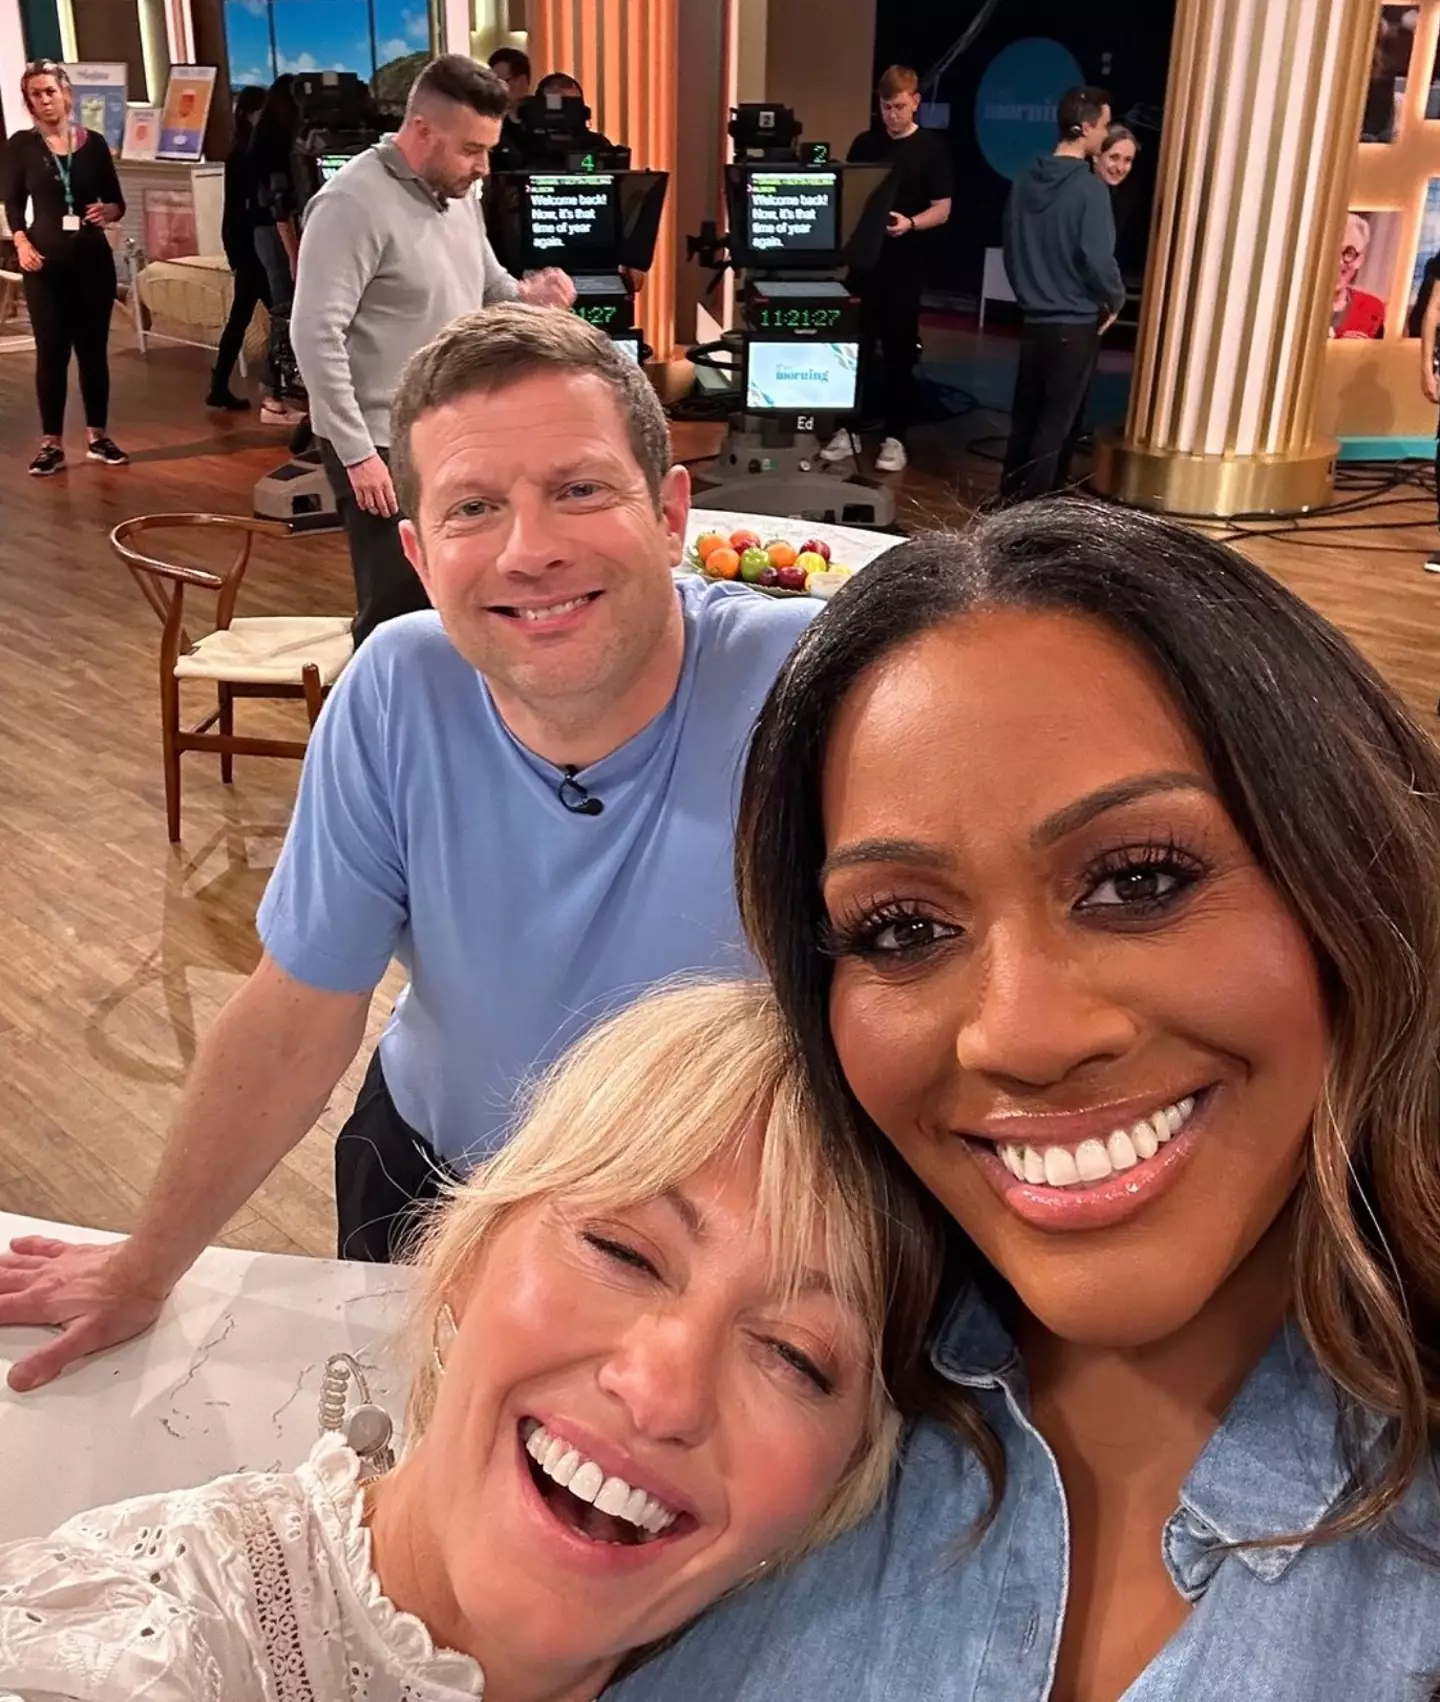 McKenna uploaded a smiling selfie with the This Morning hosts which did not feature the comedian (Instagram/@clodagh_mckenna)